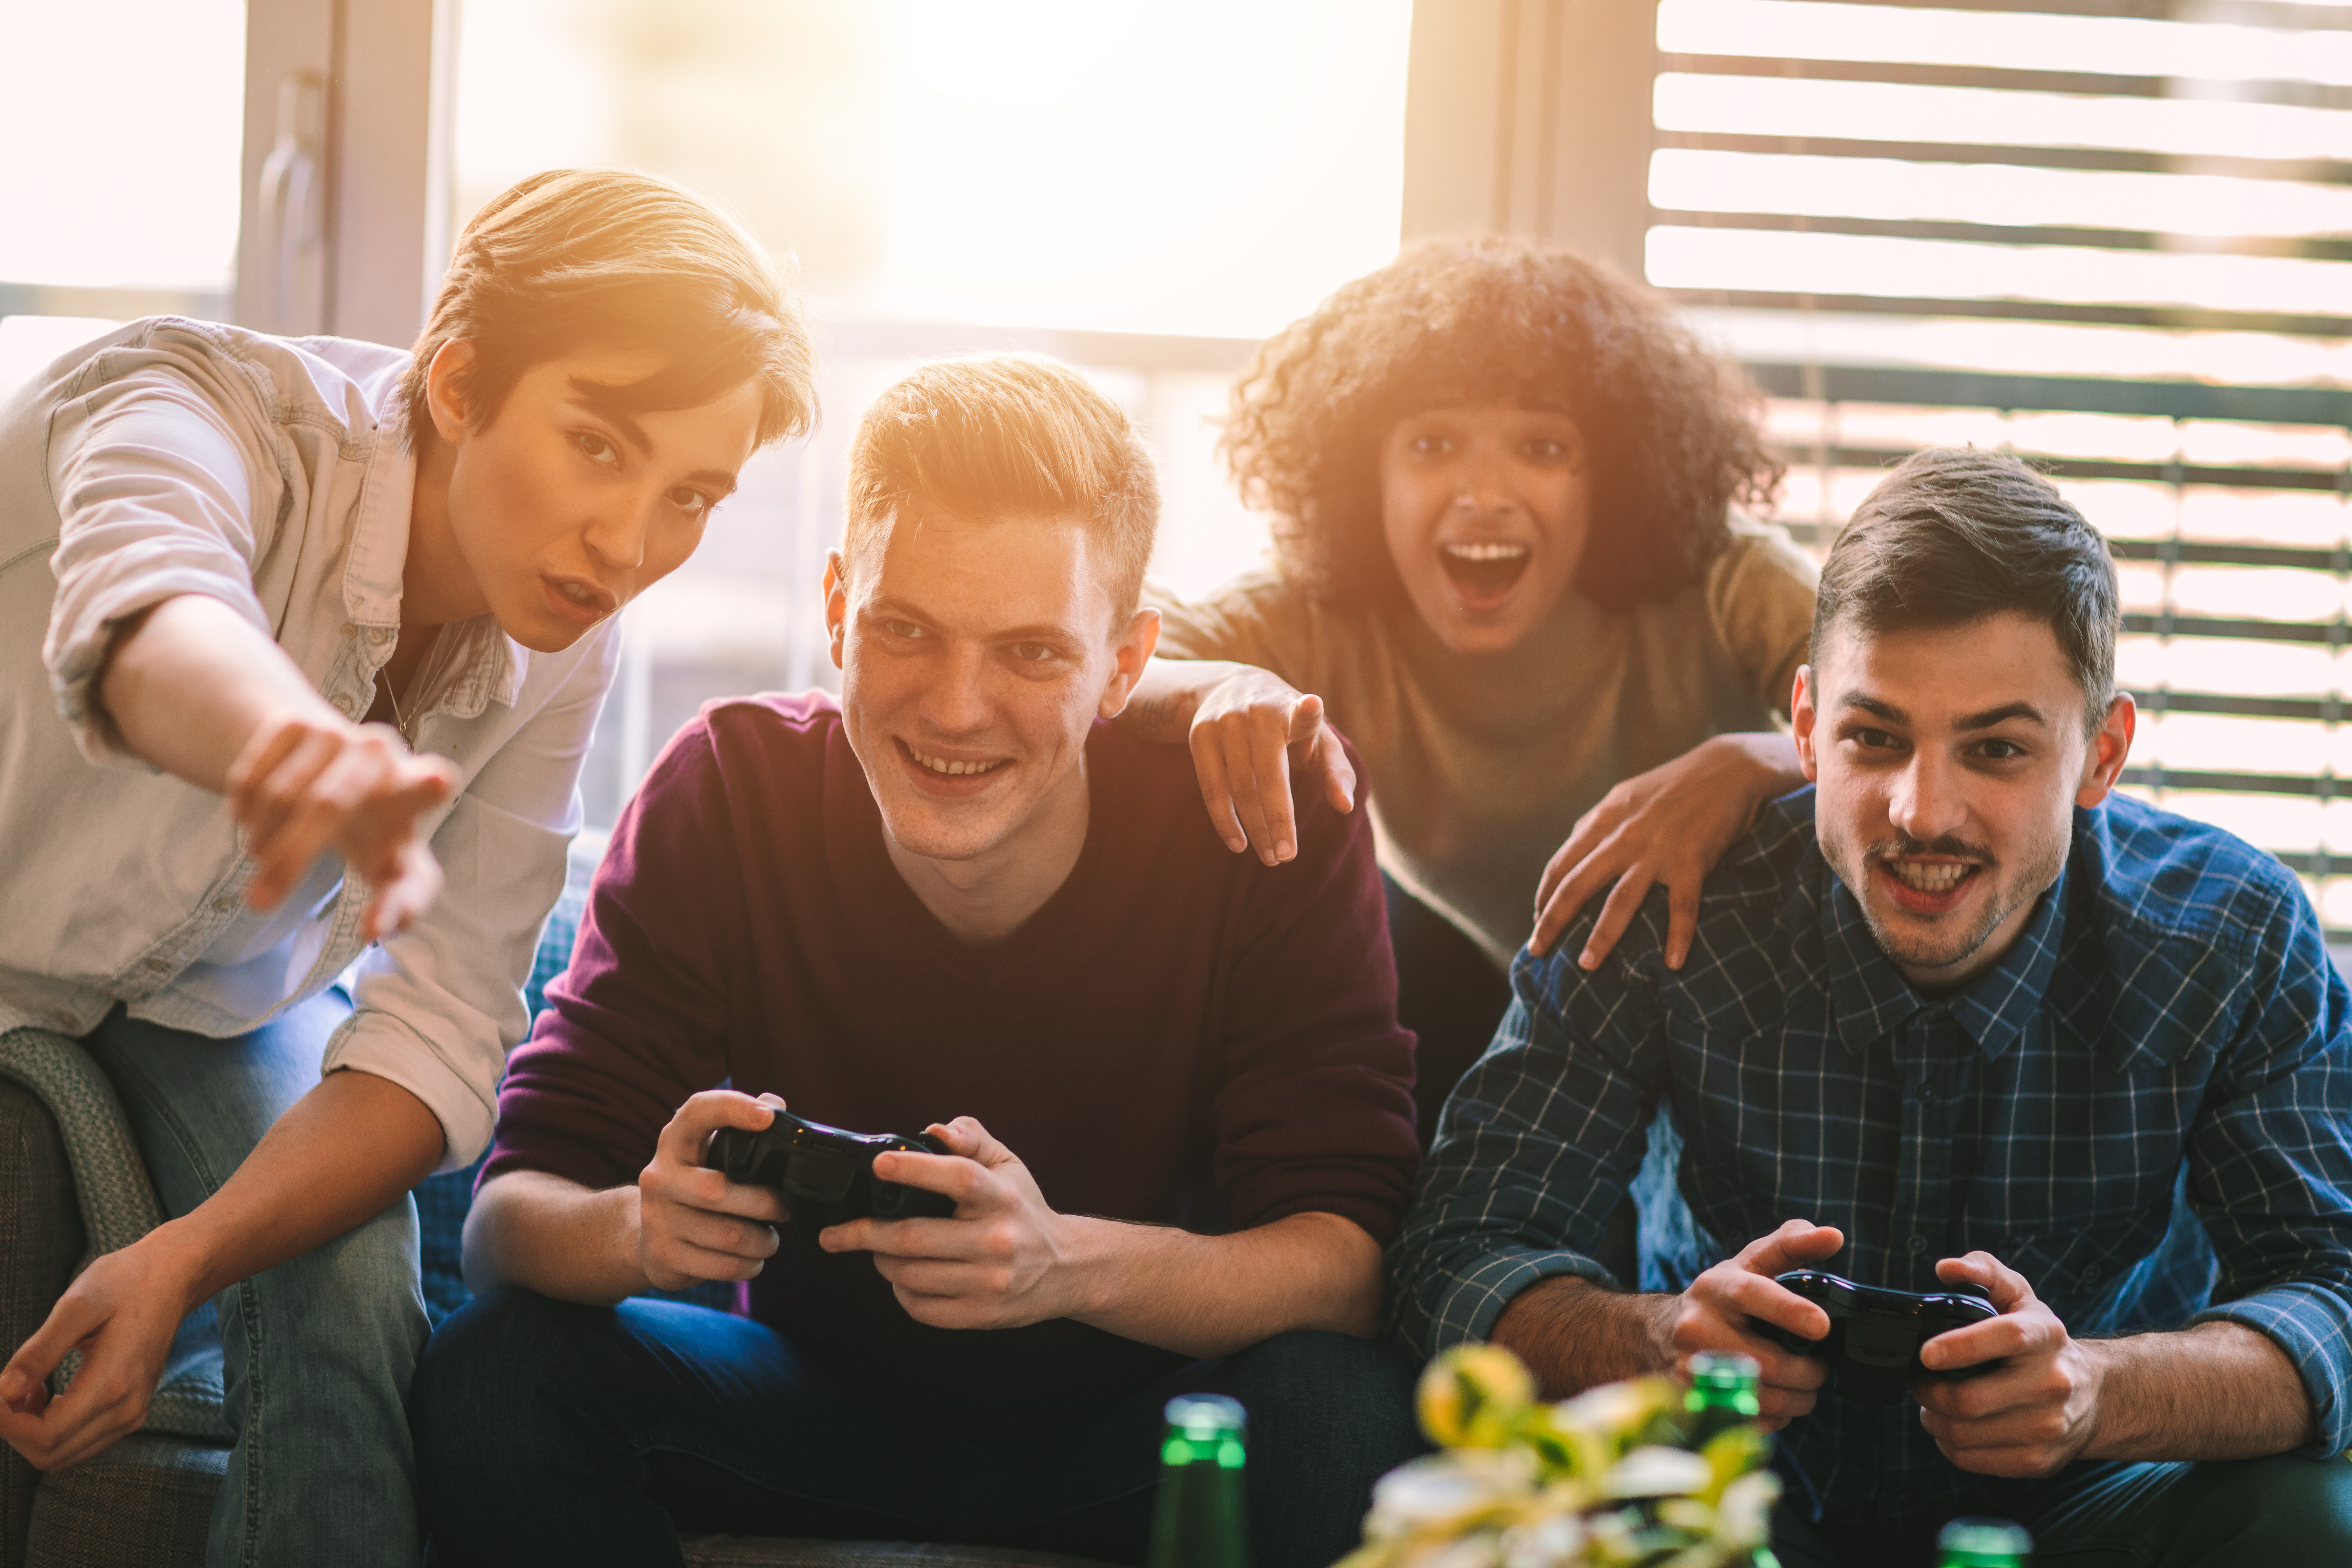 A group of friends gaming together.